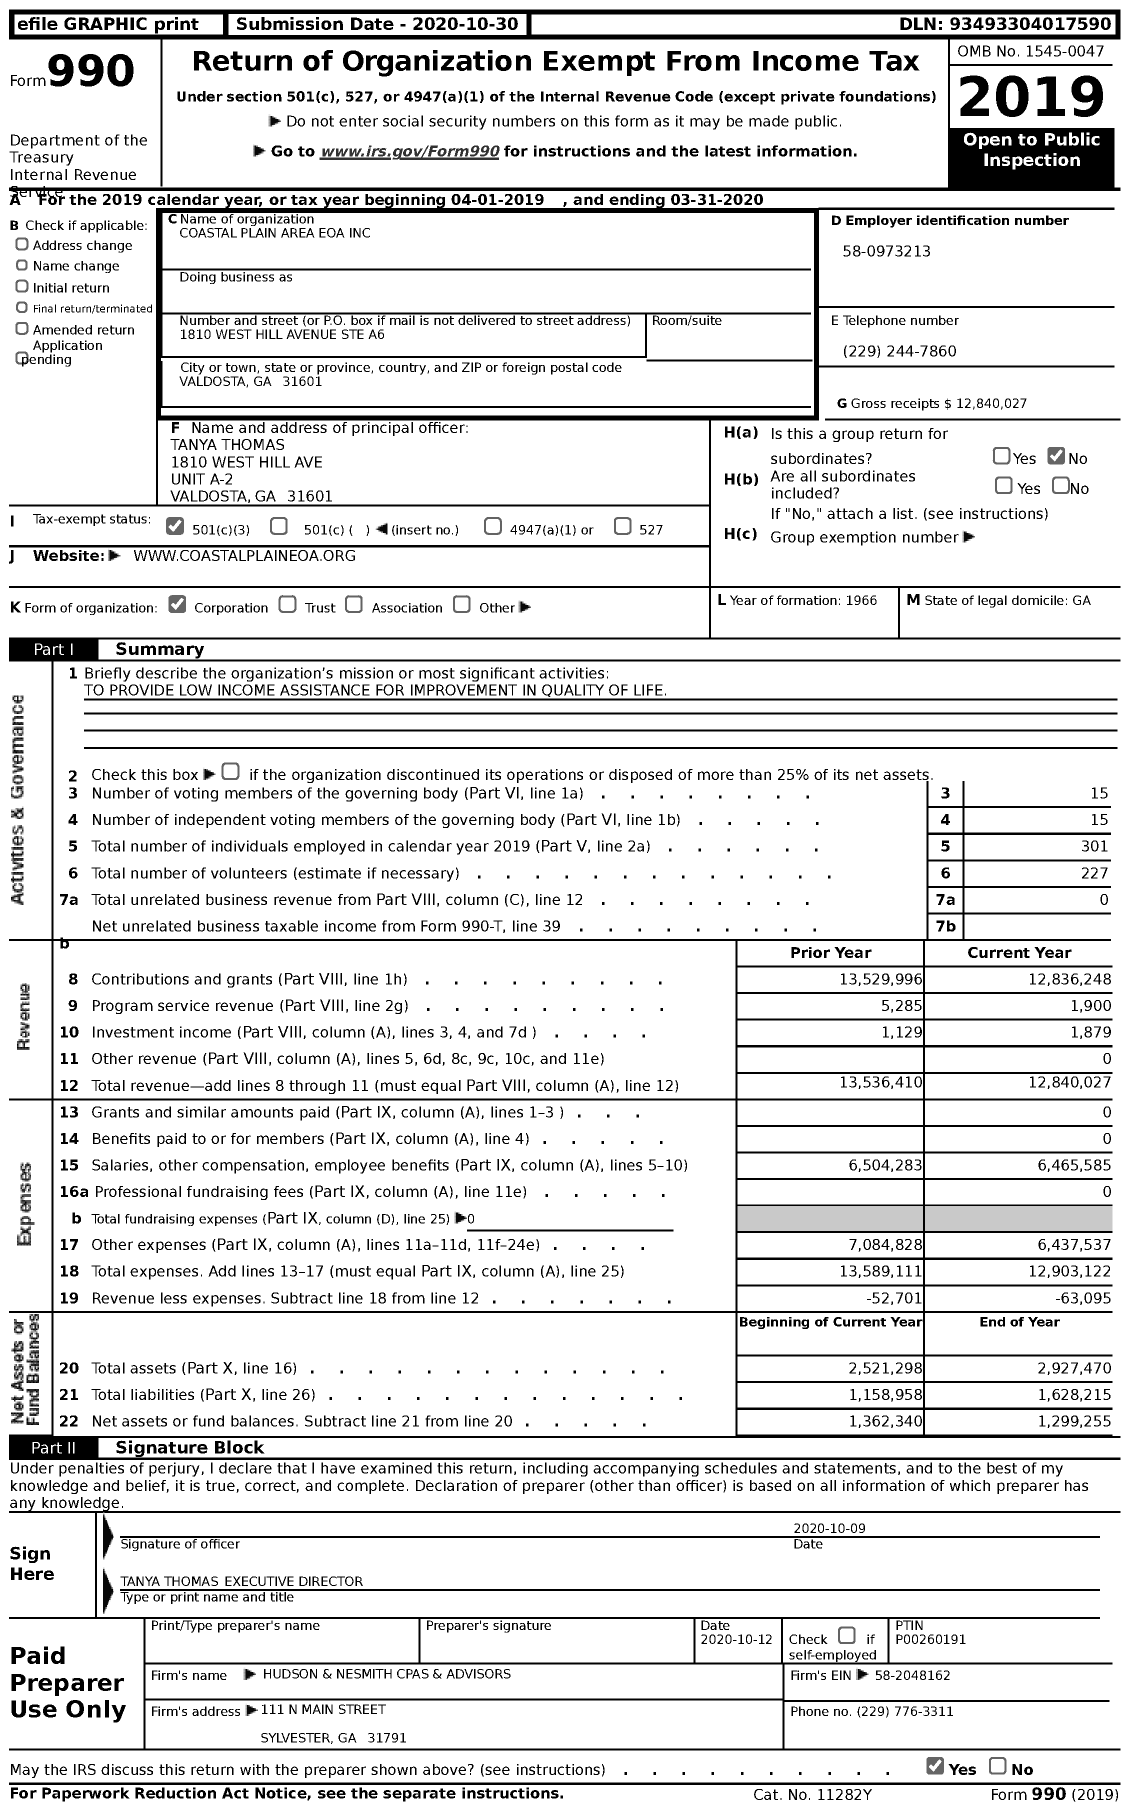 Image of first page of 2019 Form 990 for Coastal Plain Area Eoa